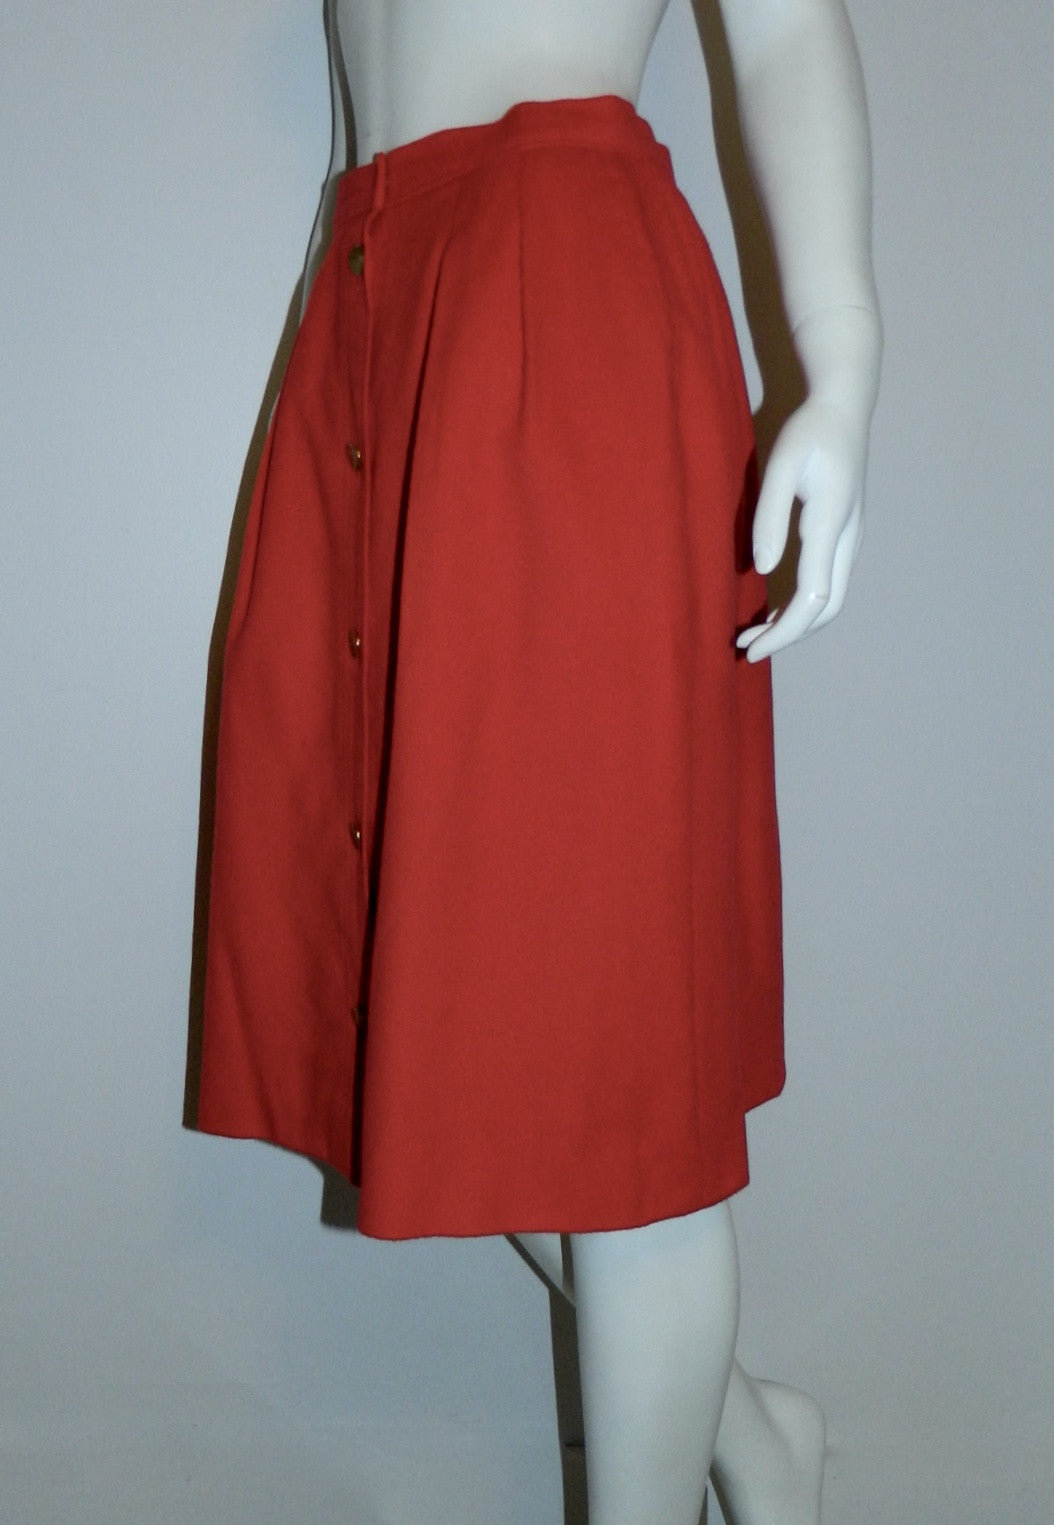 vintage 1980s skirt red cashmere Loro Piana button front midi skirt M